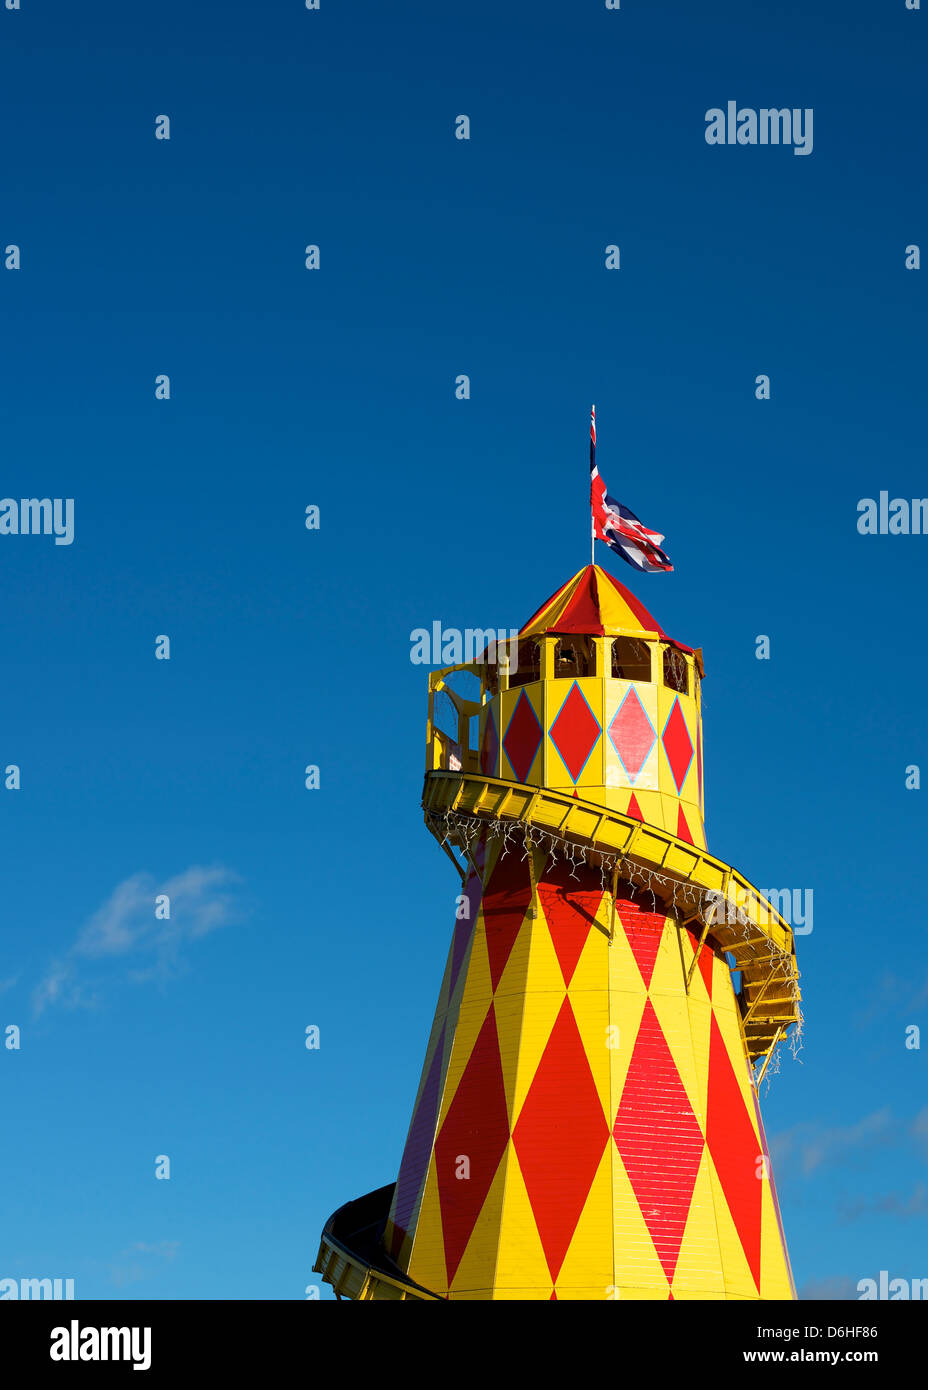 A Red and Yellow Helter Skelter funfair fairground attraction with a Union Flag set against a blue sky background Stock Photo